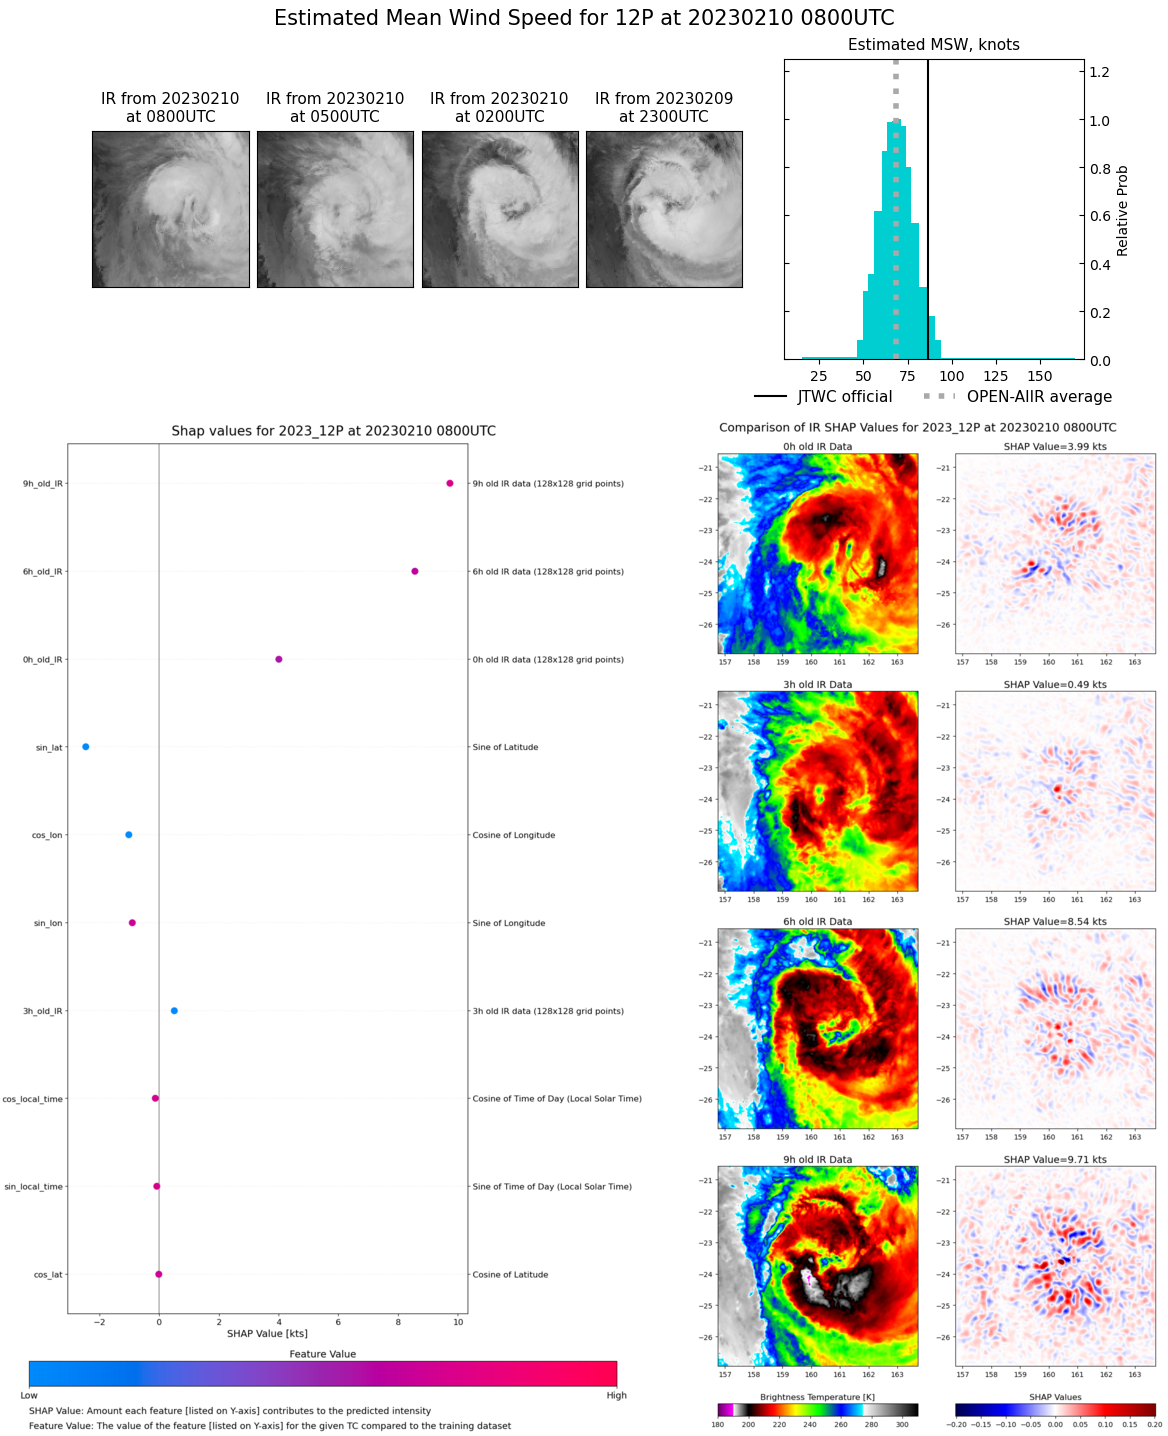 SATELLITE ANALYSIS, INITIAL POSITION AND INTENSITY DISCUSSION: AGAINST ALL ODDS AND IN THE FACE OF SHARPLY INCREASED NORTHWESTERLY SHEAR, ANIMATED MULTISPECTRAL SATELLITE IMAGERY (MSI), A SERIES OF RECENT MICROWAVE IMAGERY AND RECENT SCATTEROMETER AND SMAP PASSES, INDICATE THAT TC 12P (GABRIELLE) HAS INTENSIFIED. HOWEVER, THE PEAK HAS PROBABLY BEEN REACHED AND THE SYSTEM NOW FACES A RAPID TRANSITION TO A SUBTROPICAL LOW. THE MSI AND ENHANCED INFRARED (EIR) IMAGERY INDICATES THE SYSTEM REMAINS DEVOID OF A DISTINCT EYE FEATURE, EVEN NOW AT ITS PEAK. HOWEVER, MICROWAVE IMAGERY THROUGH THE DAY HAS SHOWN CONSISTENT LOW-LEVEL EYE FEATURES, WITH THE SMALLEST, BEST DEFINED MICROWAVE EYE IN THE MOST RECENT 100527Z SSMIS 37GHZ IMAGE. THE STRONGEST CONVECTION REMAINS DOWNSHEAR, IN THE SOUTHEASTERN QUADRANT, BUT THE EYEWALL REMAINS FIRM ON THE NORTHWEST SIDE, FOR NOW. THE INITIAL INTENSITY HAS BEEN INCREASED TO 90 KNOTS, WHICH IS ABOVE ALL THE OBJECTIVE ESTIMATES BUT IN LINE WITH THE SUBJECTIVE ESTIMATES. THE ADT IS T5.3 (97 KTS), THE AIDT IS 87 KTS AND THE SATCON IS 96 KTS AND A 100331Z AMSR2 WINDSPEED ESTIMATE MEASURED 91 KTS IN THE SOUTHEAST QUADRANT, WHICH COMBINED LENDS HIGH CONFIDENCE TO THE INITIAL INTENSITY. THE SYSTEM IS MOVING INTO AN INCREASINGLY MARGINAL ENVIRONMENT, WITH SHEAR NOW AT OR ABOVE 30 KTS, THOUGH IT IS IN PHASE WITH THE STORM MOTION, HENCE HOW THE SYSTEM HAS BEEN ABLE TO CONTINUE TO INTENSIFY. TC 12P IS IN THE PROCESS OF CROSSING THE 26C ISOTHERM AND WATER VAPOR IMAGERY SHOWS A VERY SHARP UPPER-LEVEL TROUGH, WITH VERY DRY AIR TRAILING THE TROUGH AXIS, JUST TO THE WEST.  THE SYSTEM IS ALREADY STARTING THE VERY EARLY STAGES OF SUBTROPICAL TRANSITION AS IT RACES OFF TO THE SOUTHEAST ALONG THE STRENGTHENING GRADIENT BETWEEN THE SUBTROPICAL RIDGE (STR) TO THE EAST AND THE TROUGH TO THE WEST.